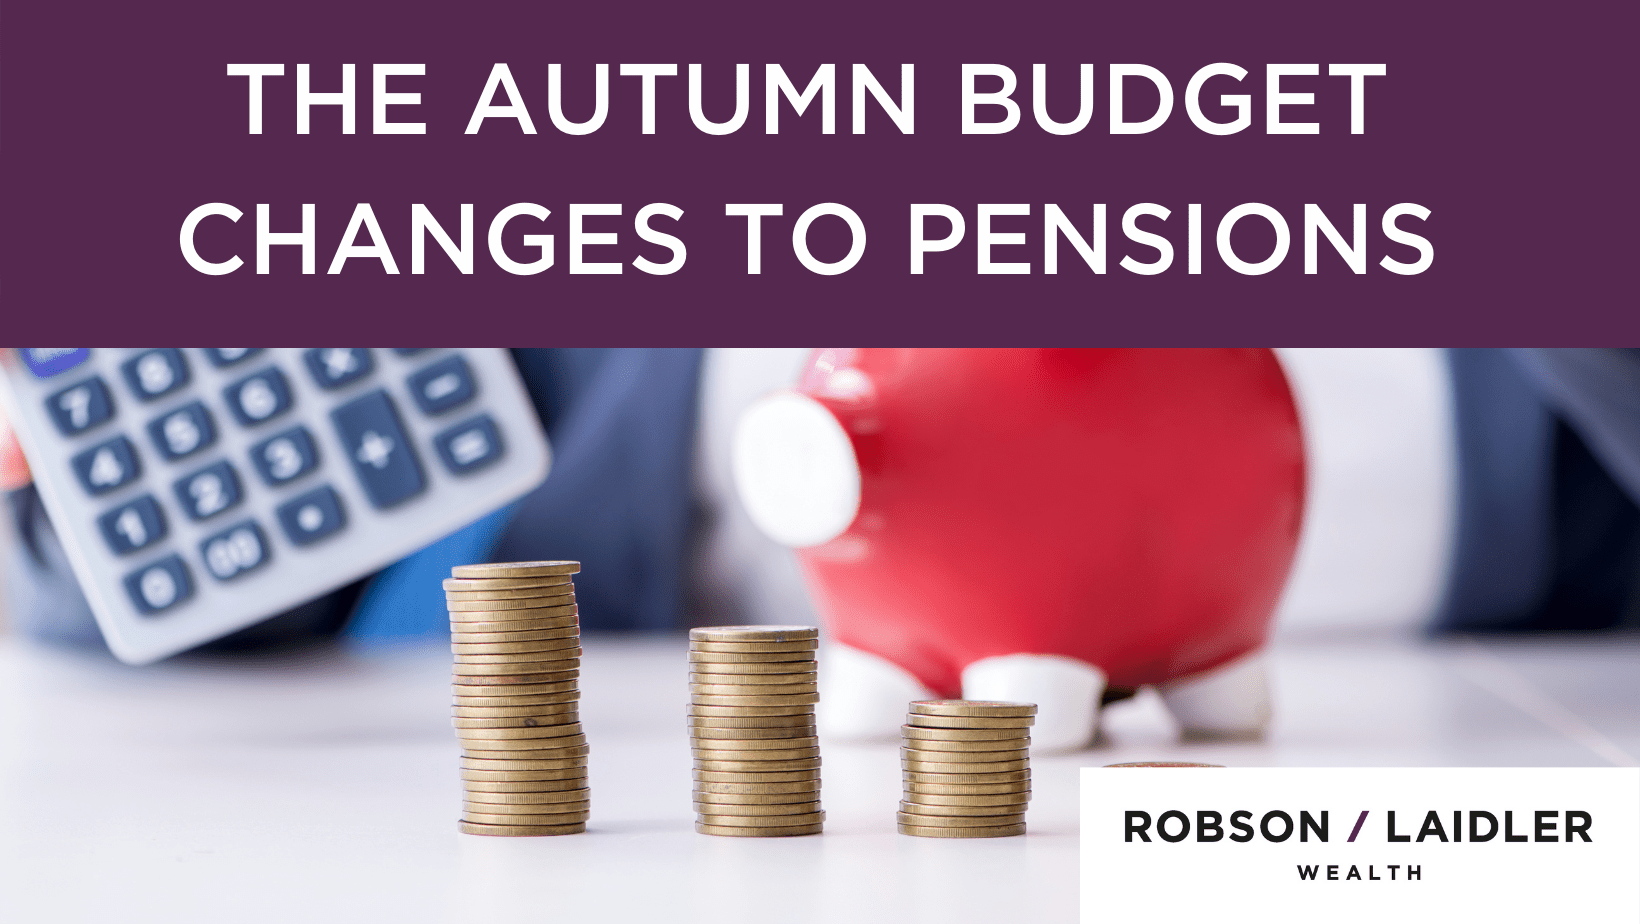 The Autumn Budget Changes to Pensions